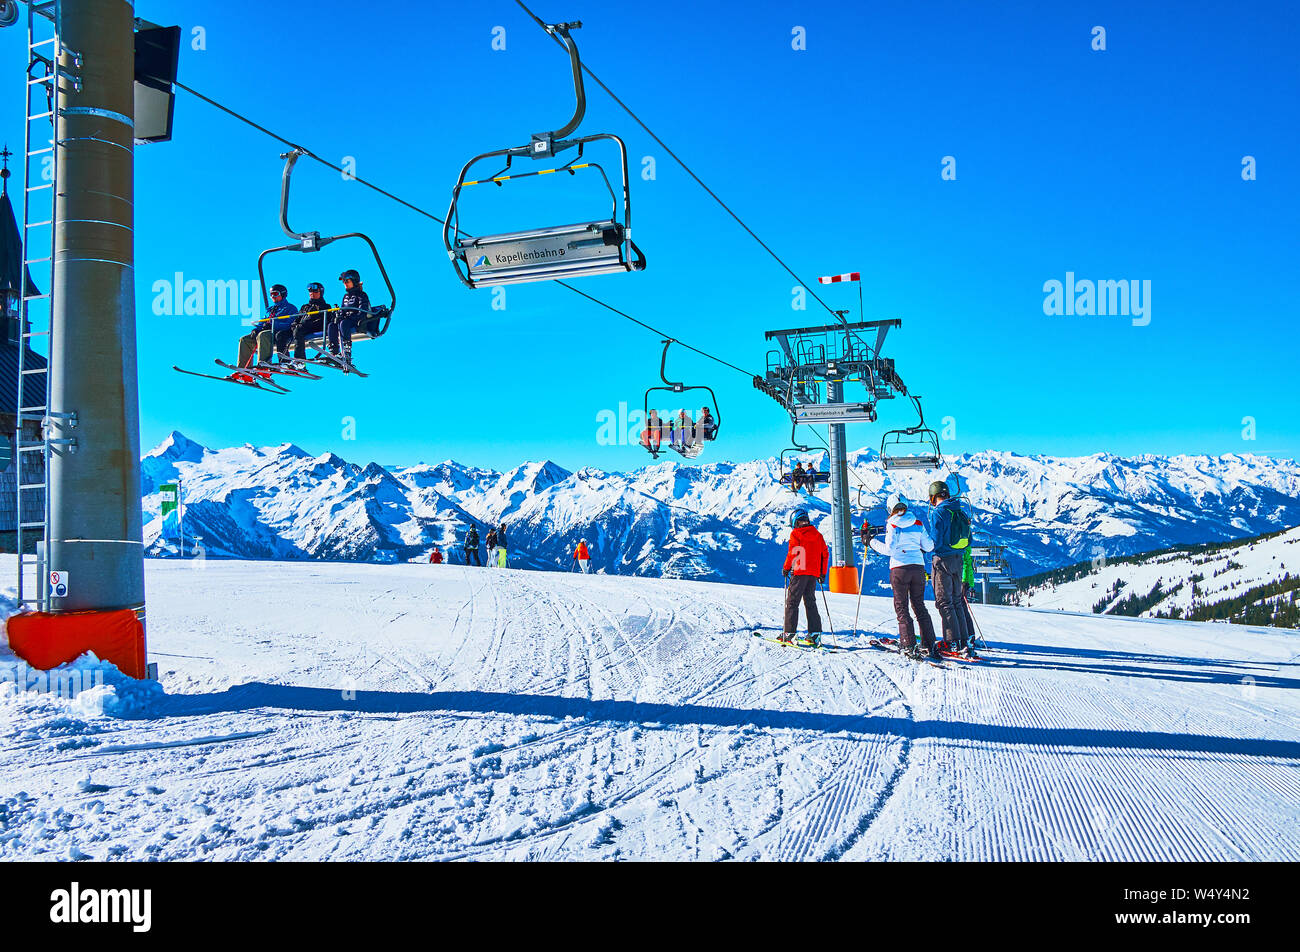 ZELL AM SEE, AUSTRIA - FEBRUARY 28, 2019: Kapellenbahn chairlift with skiers and boarders rides to the top of Schmittenhohe mount, overlooking Alpine Stock Photo